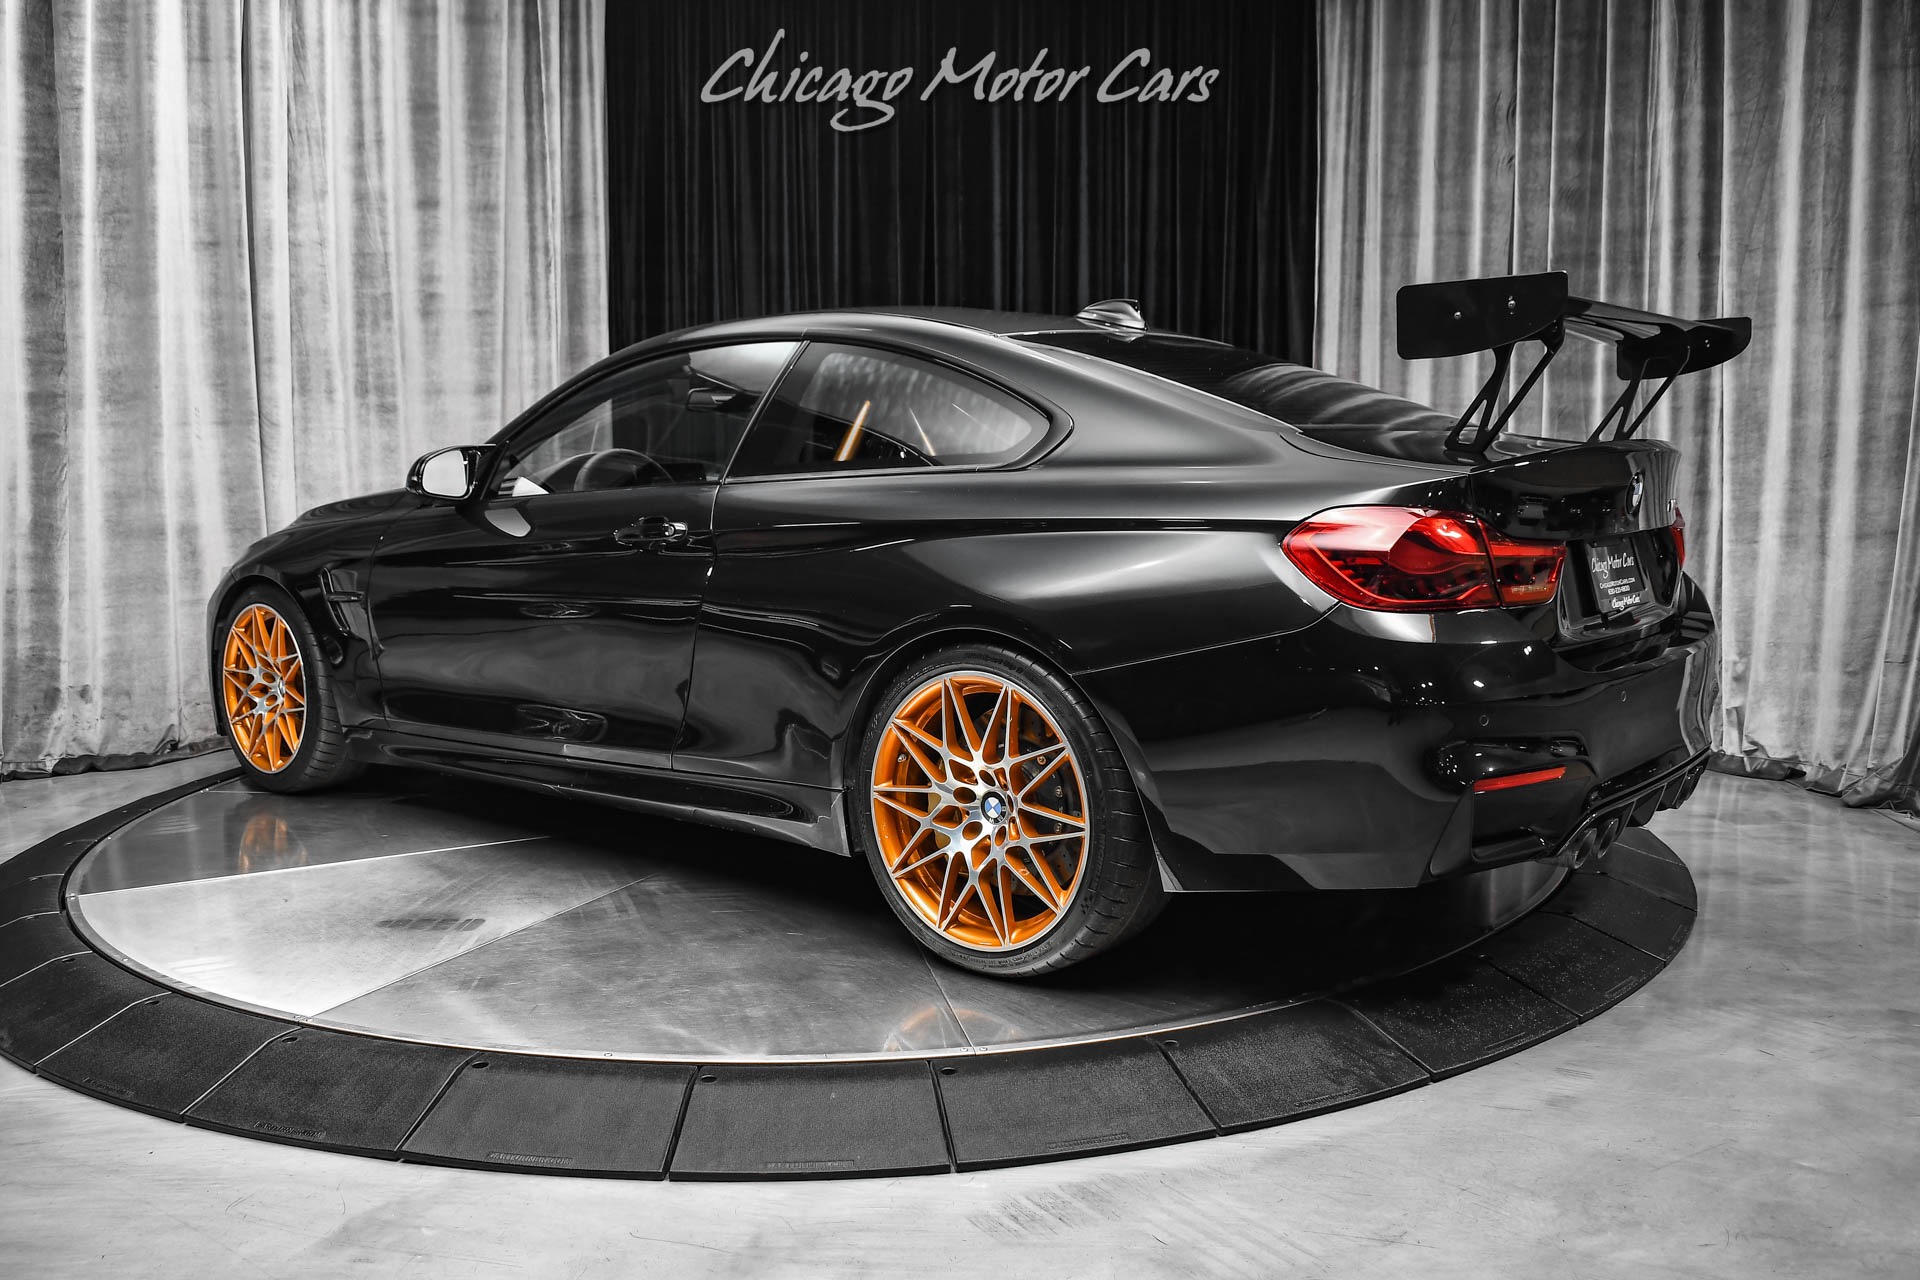 Used-2016-BMW-M4-GTS-Coupe-Only-9k-Miles-RARE-Track-Focused-GTS-Model-Carbon-Ceramics